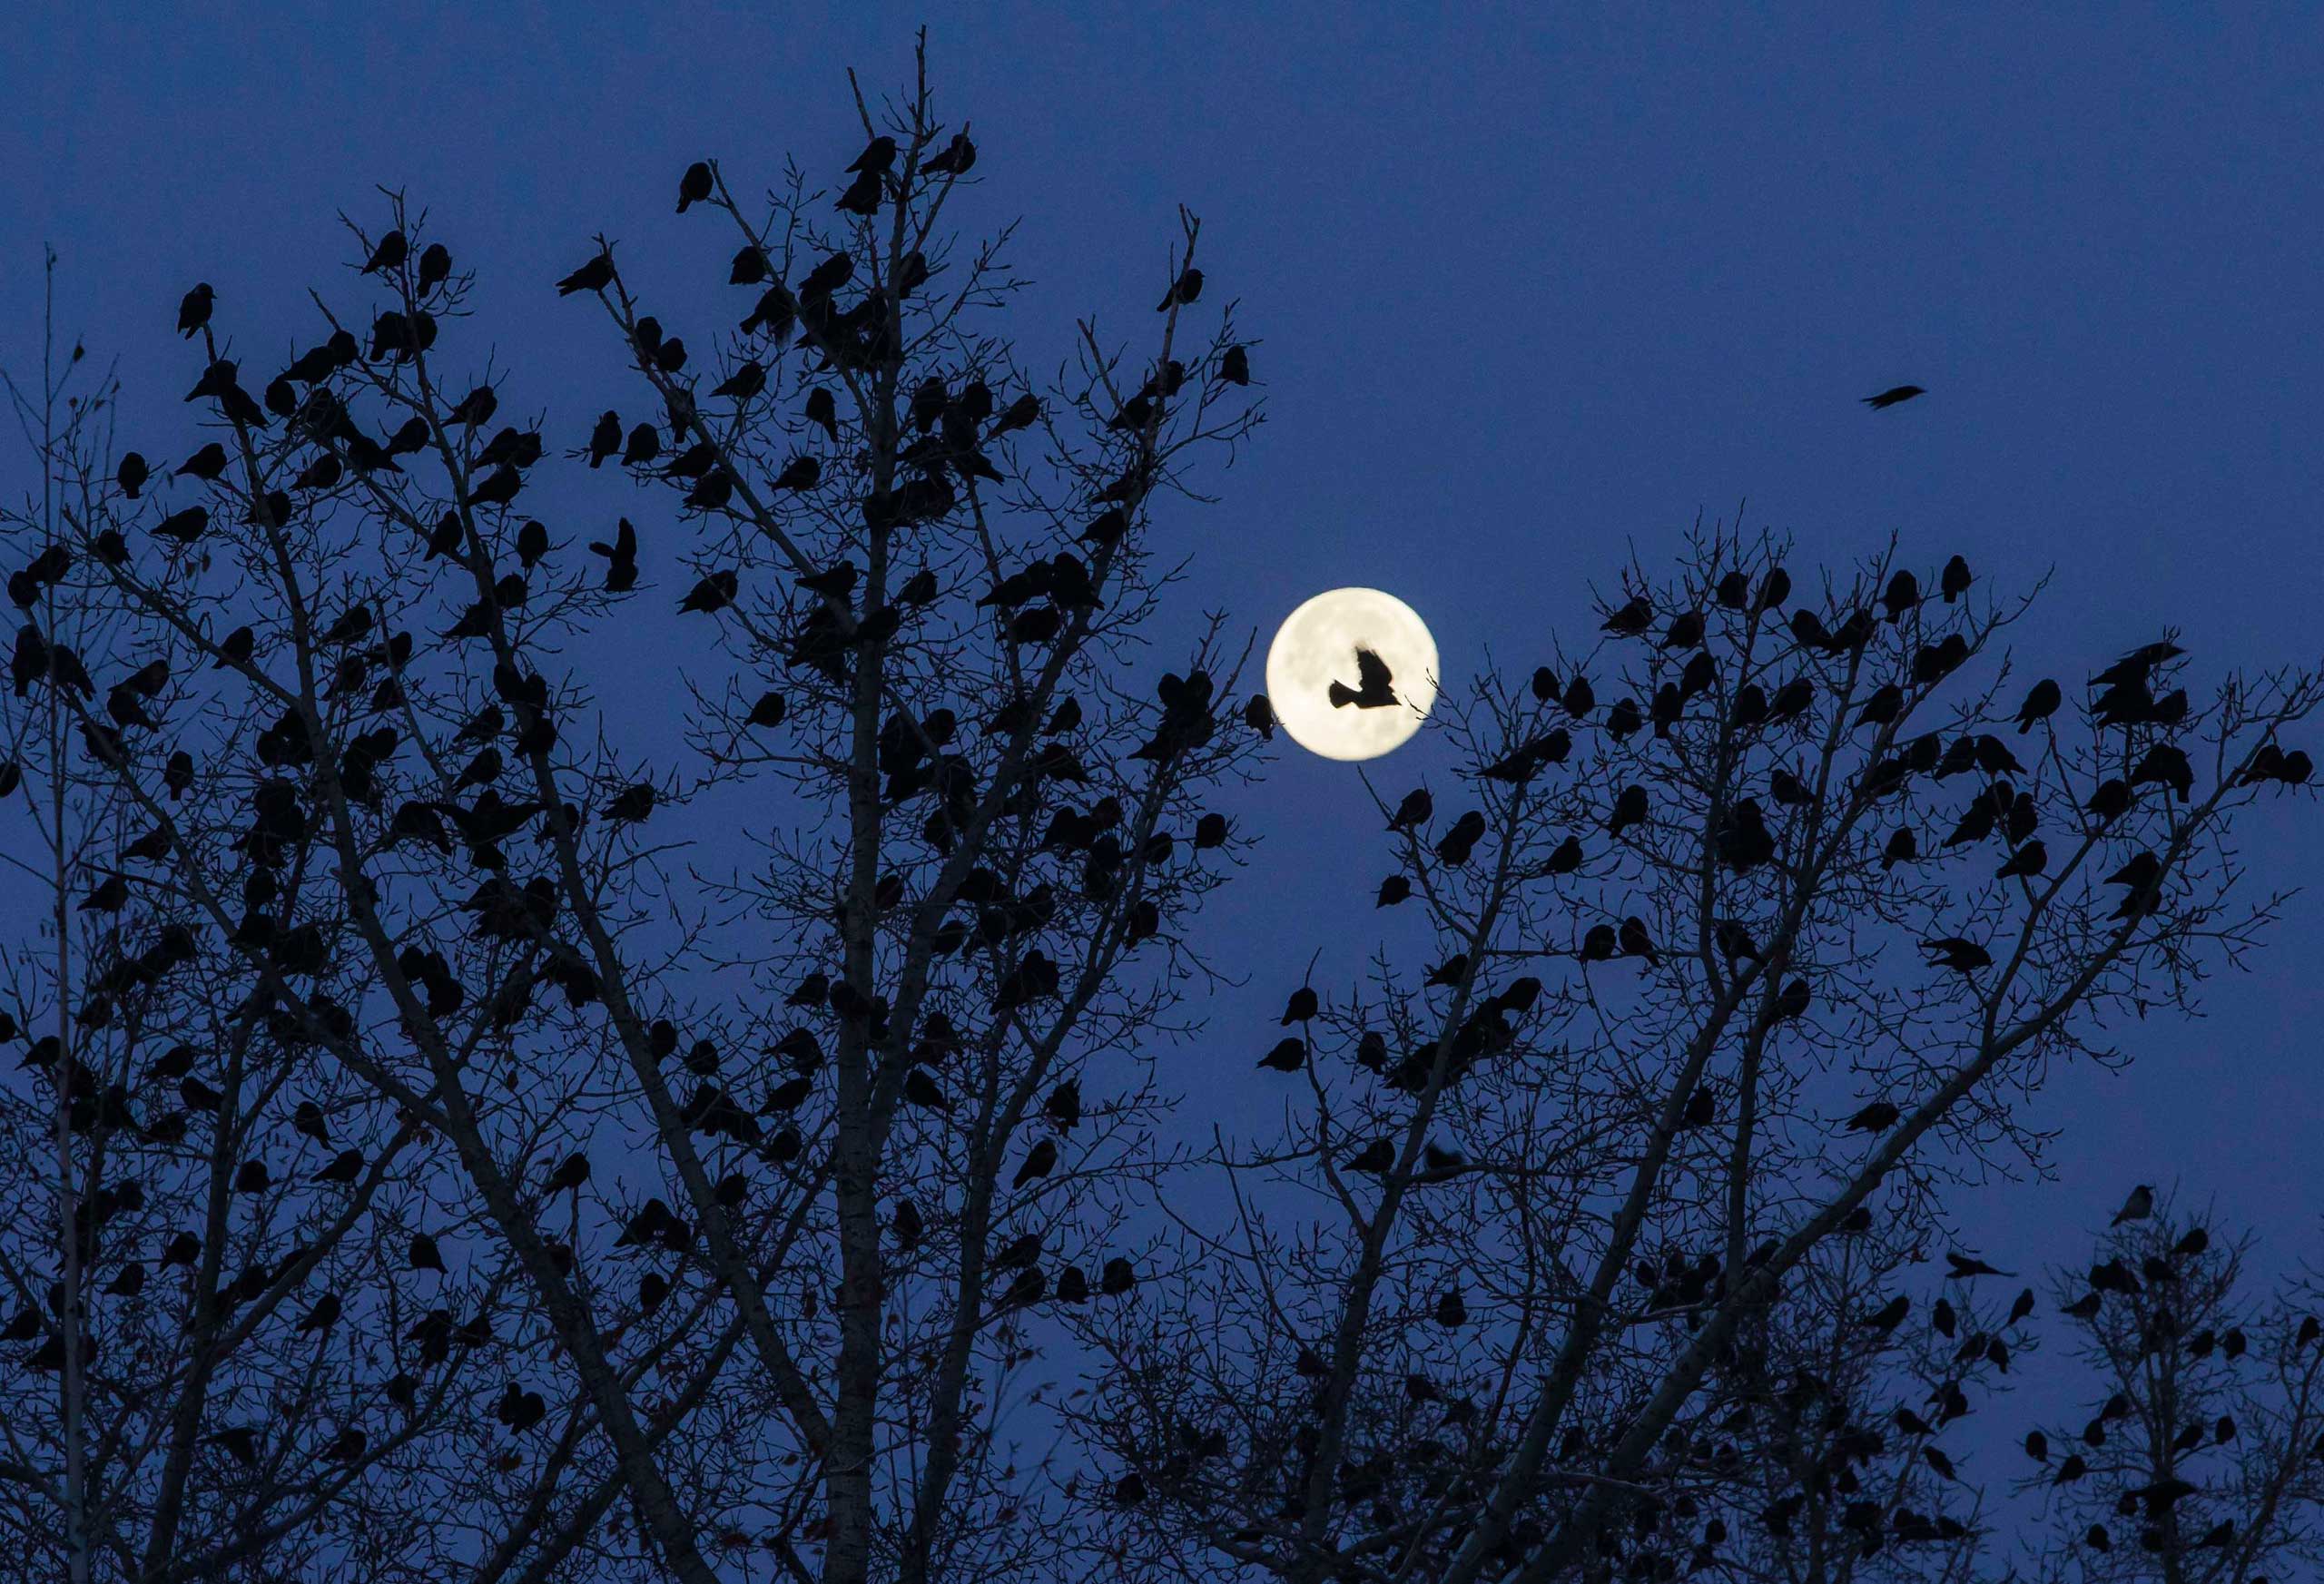 Nov. 8, 2014. A flock of birds is seen on a tree against the moon in Kostanay, northern Kazakhstan.